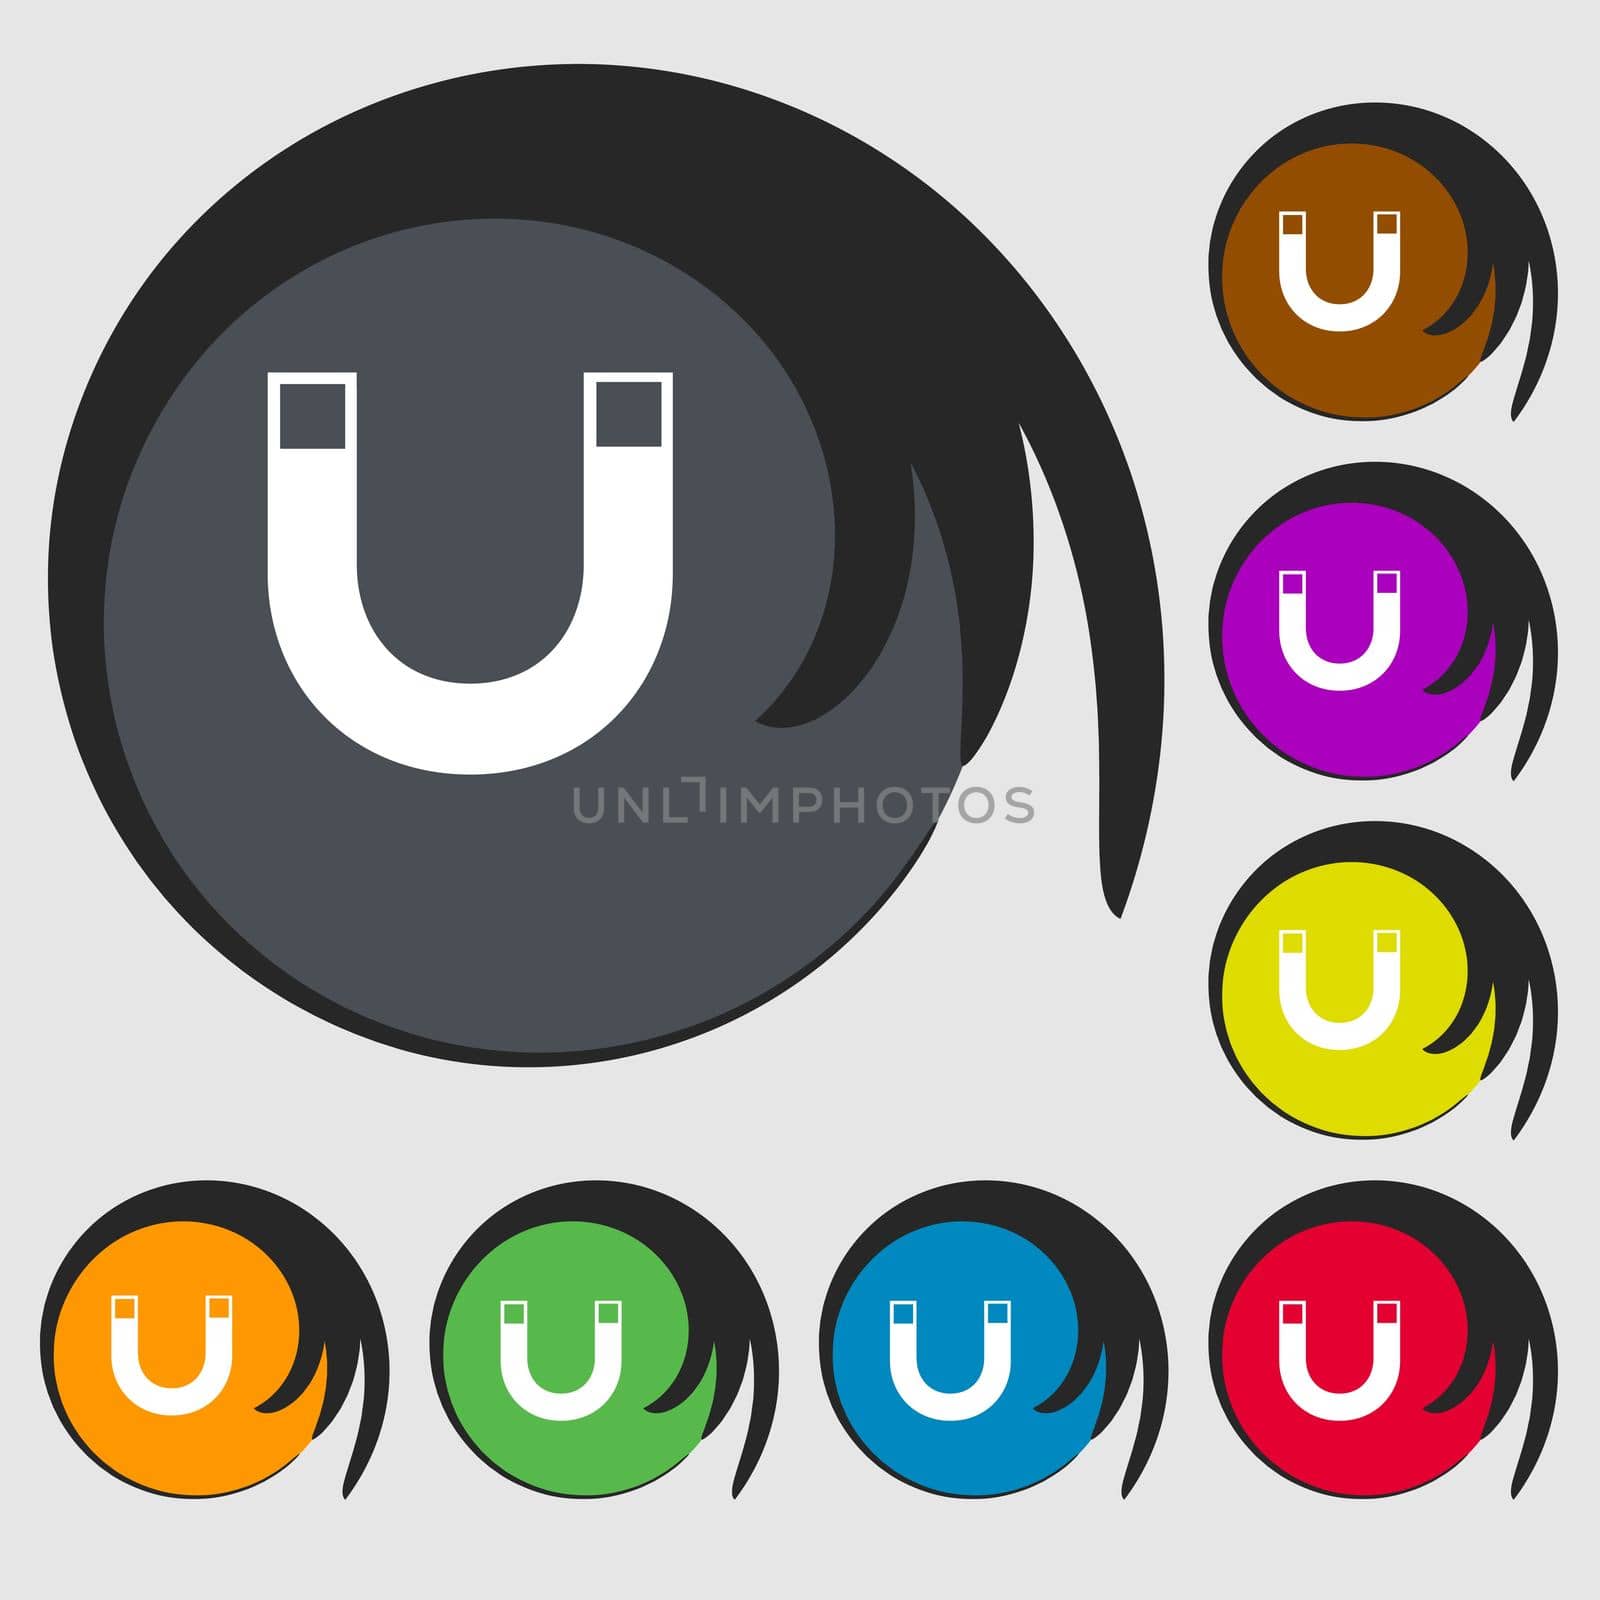 magnet sign icon. horseshoe it symbol. Repair sig. Symbols on eight colored buttons. illustration